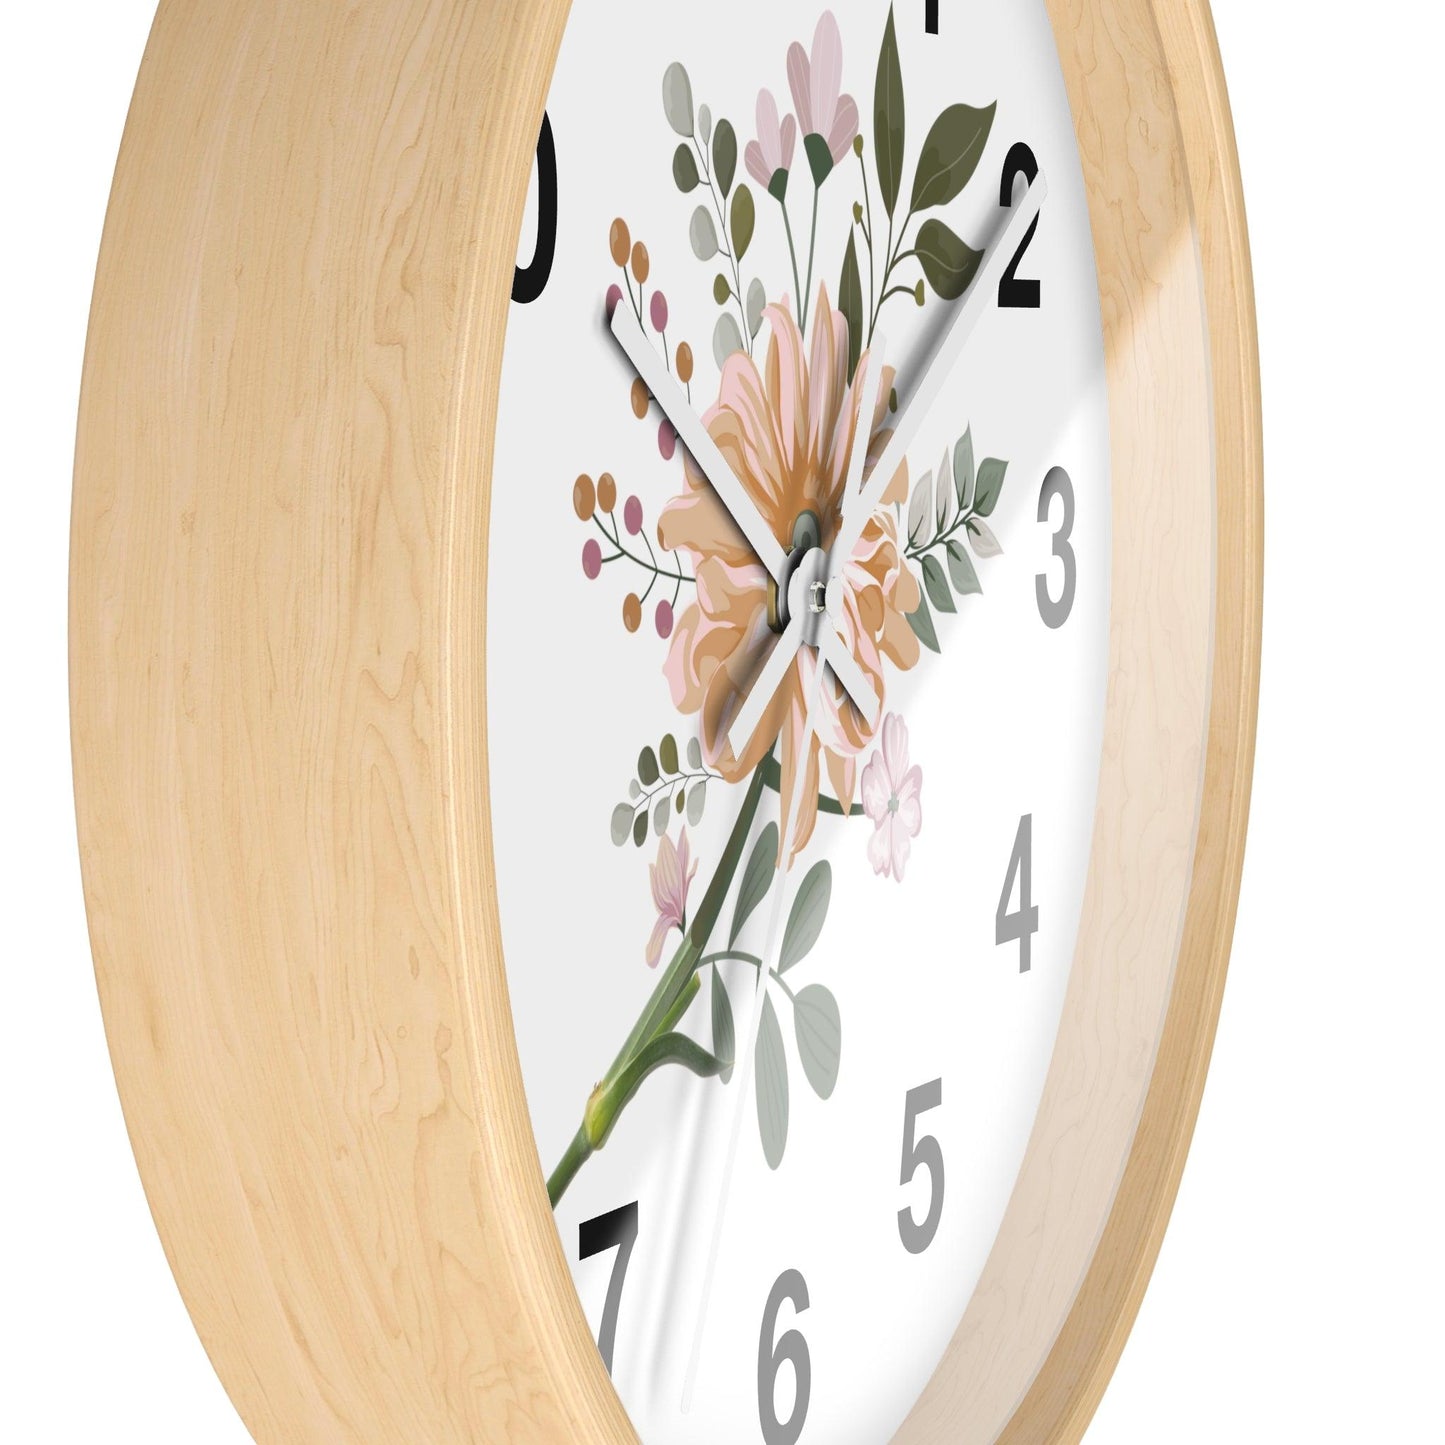 Flower Wall Clock Floral Wall Clock Home Decor Gift House Warming Gift - Mom Gift Unique Gift Farmhouse Clocks For Wall Living Room Bedroom